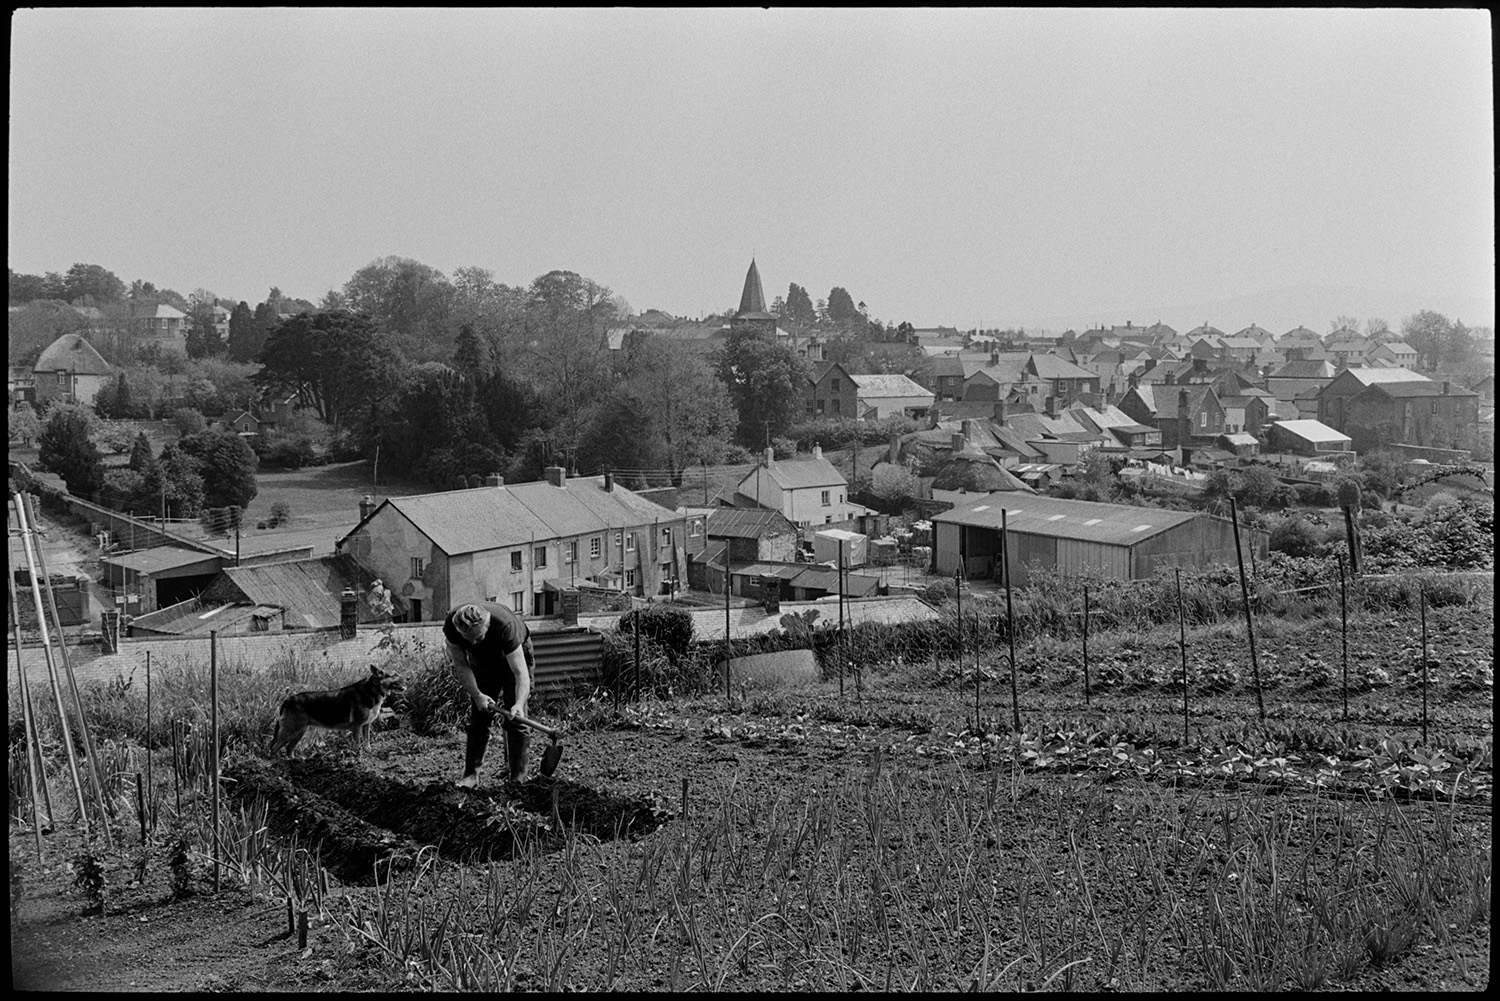 Comparison with old photo. Man gardening with town in background.
[A man, with his dog, working in a garden on a hillside above North Tawton. He is using a mattock to break up the ground. A view of the town buildings and church is visible in the background.]